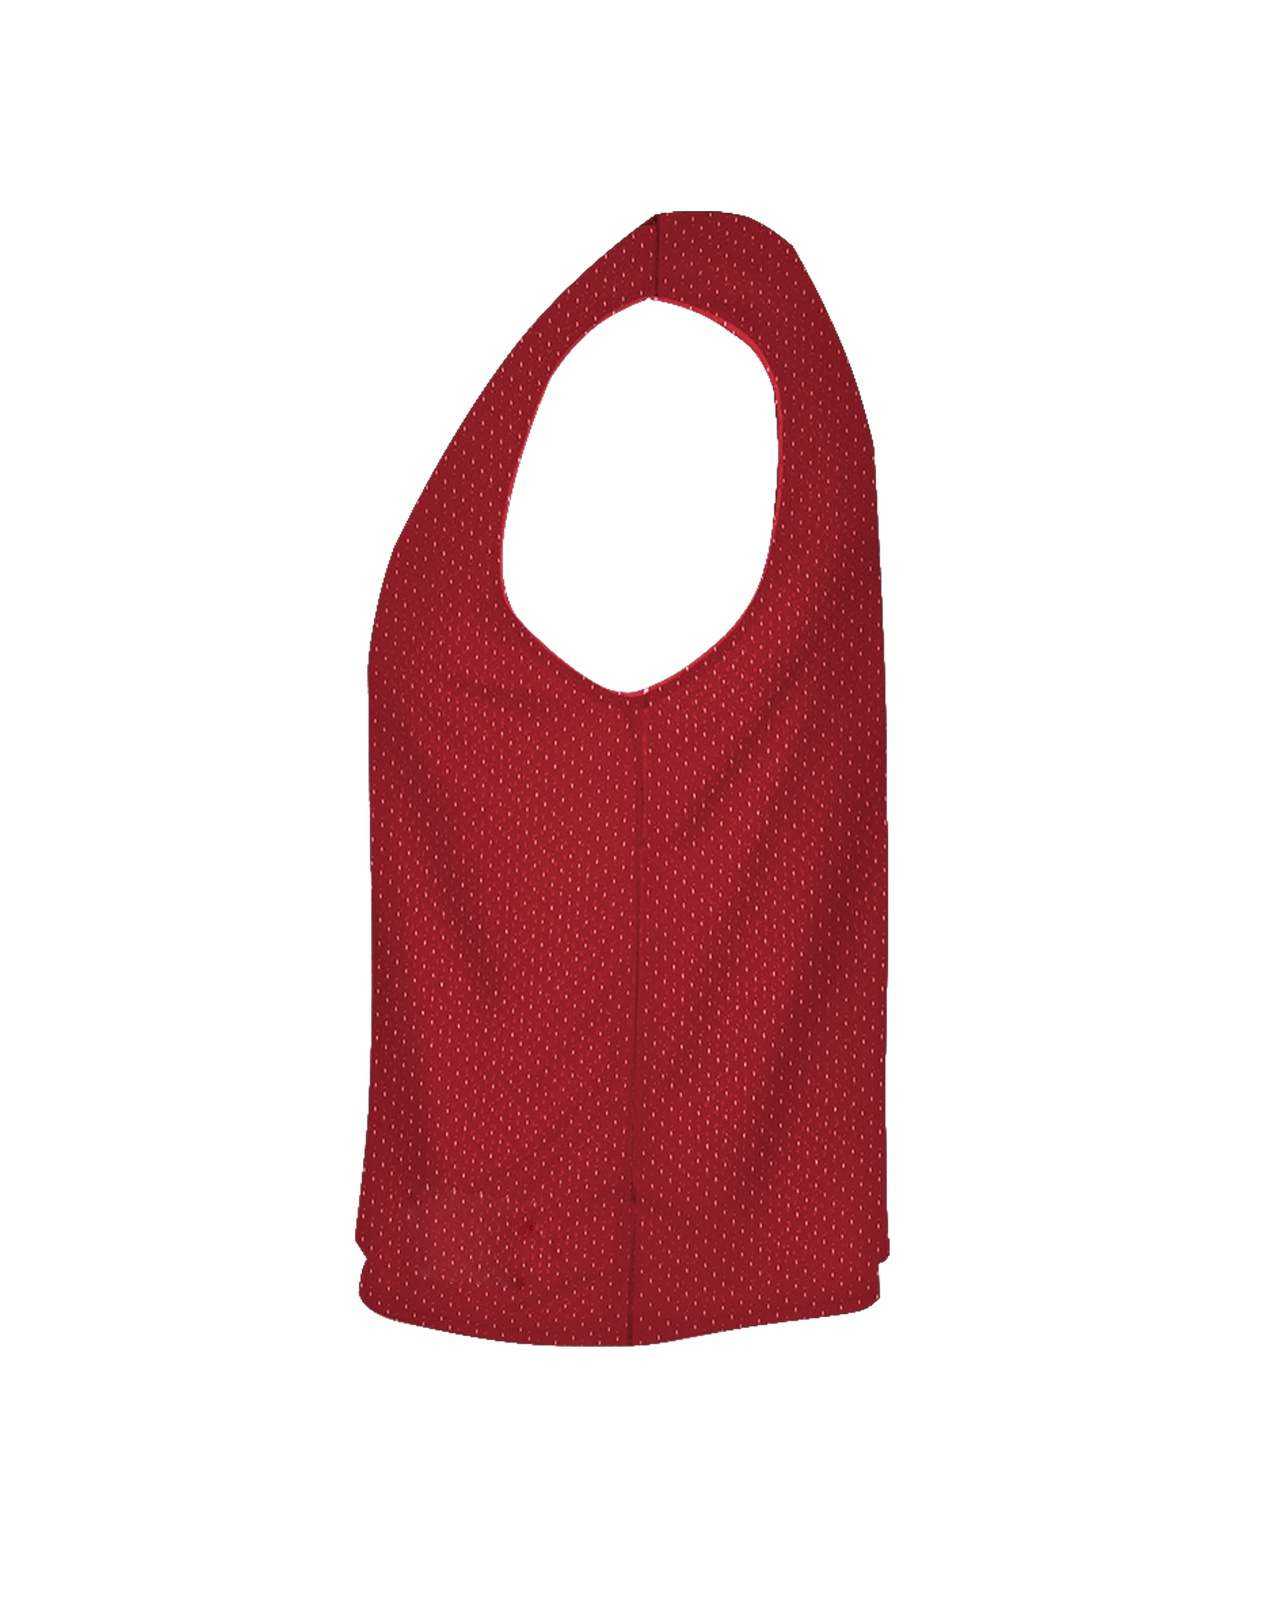 C2 Sport 5660 Mesh Reversible Womens Pinnie - Red White - HIT a Double - 1